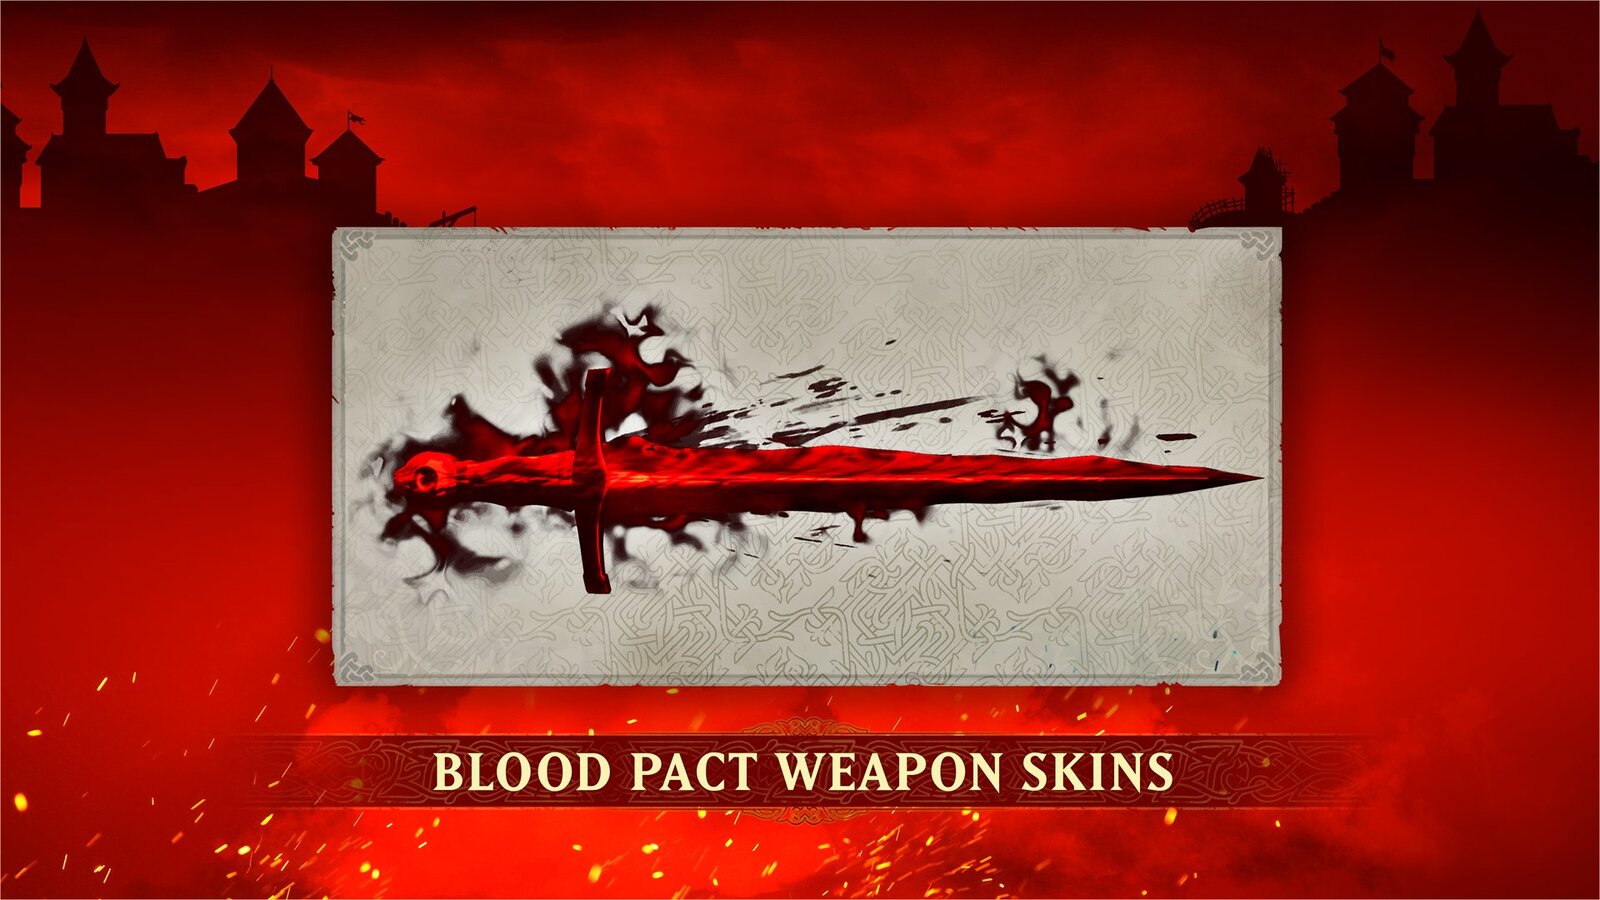 Crown Wars: The Black Prince - Blood Pact Weapon Skins